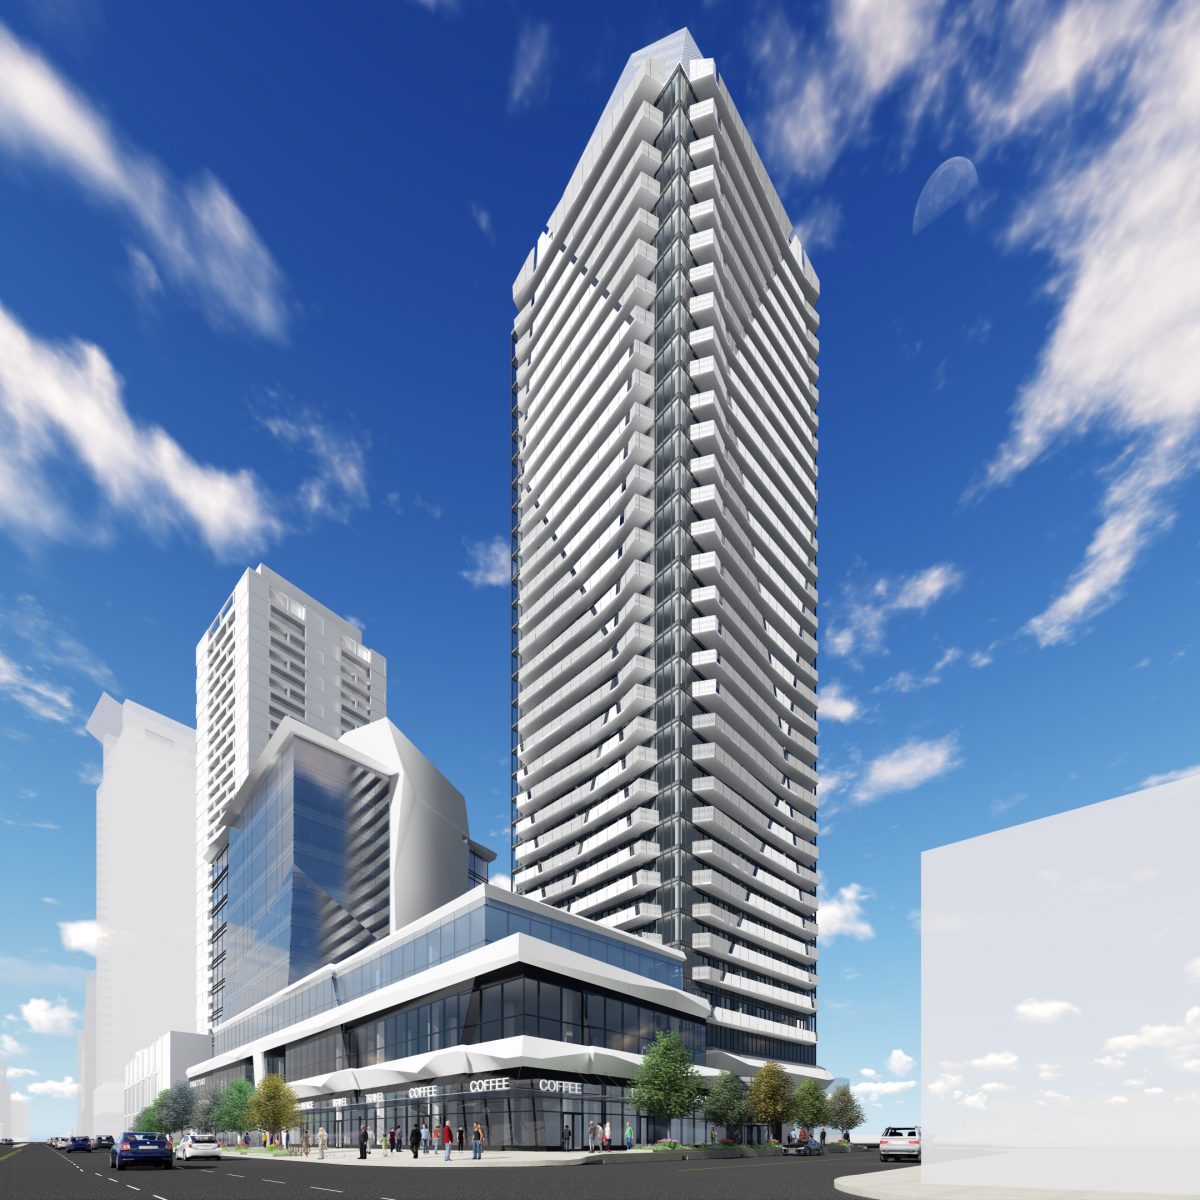 Ellie Condos is a new high rise condo complex by G Group Development Corp located in 5220 Yonge St, Toronto, ON.